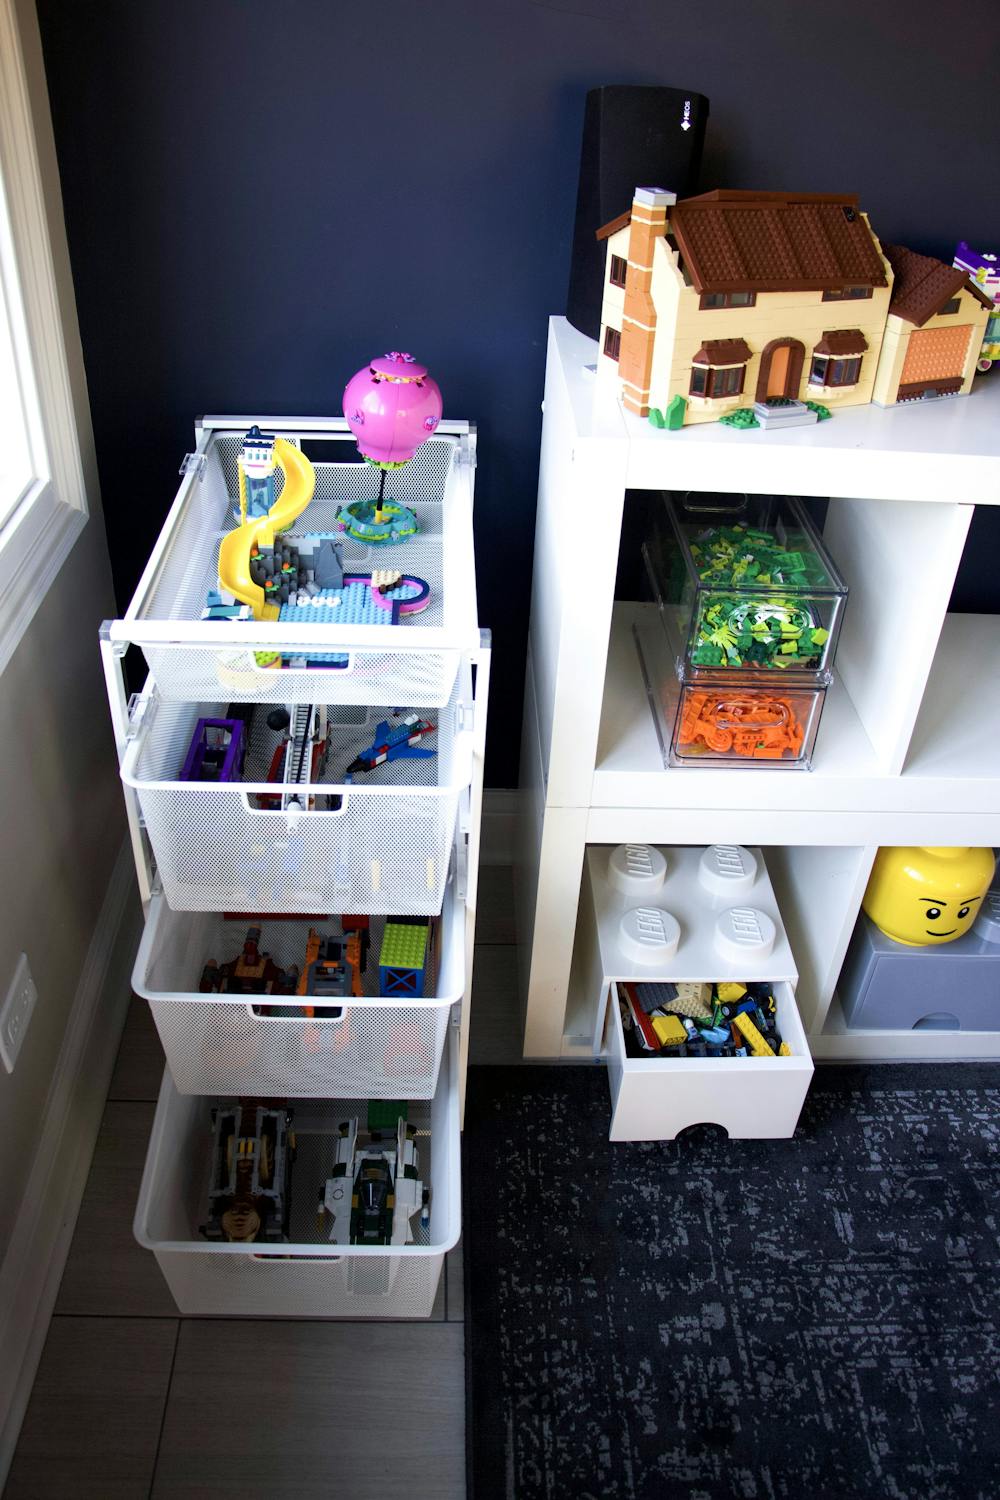 https://images.prismic.io/containerstoriesproduction/f66b9cf2-a3c9-464a-92e9-fe4987befd98_lego+creations+in+elfa+drawers+and+lego+storage.jpg?auto=compress,format&rect=0,0,3456,5184&w=1000&h=1500